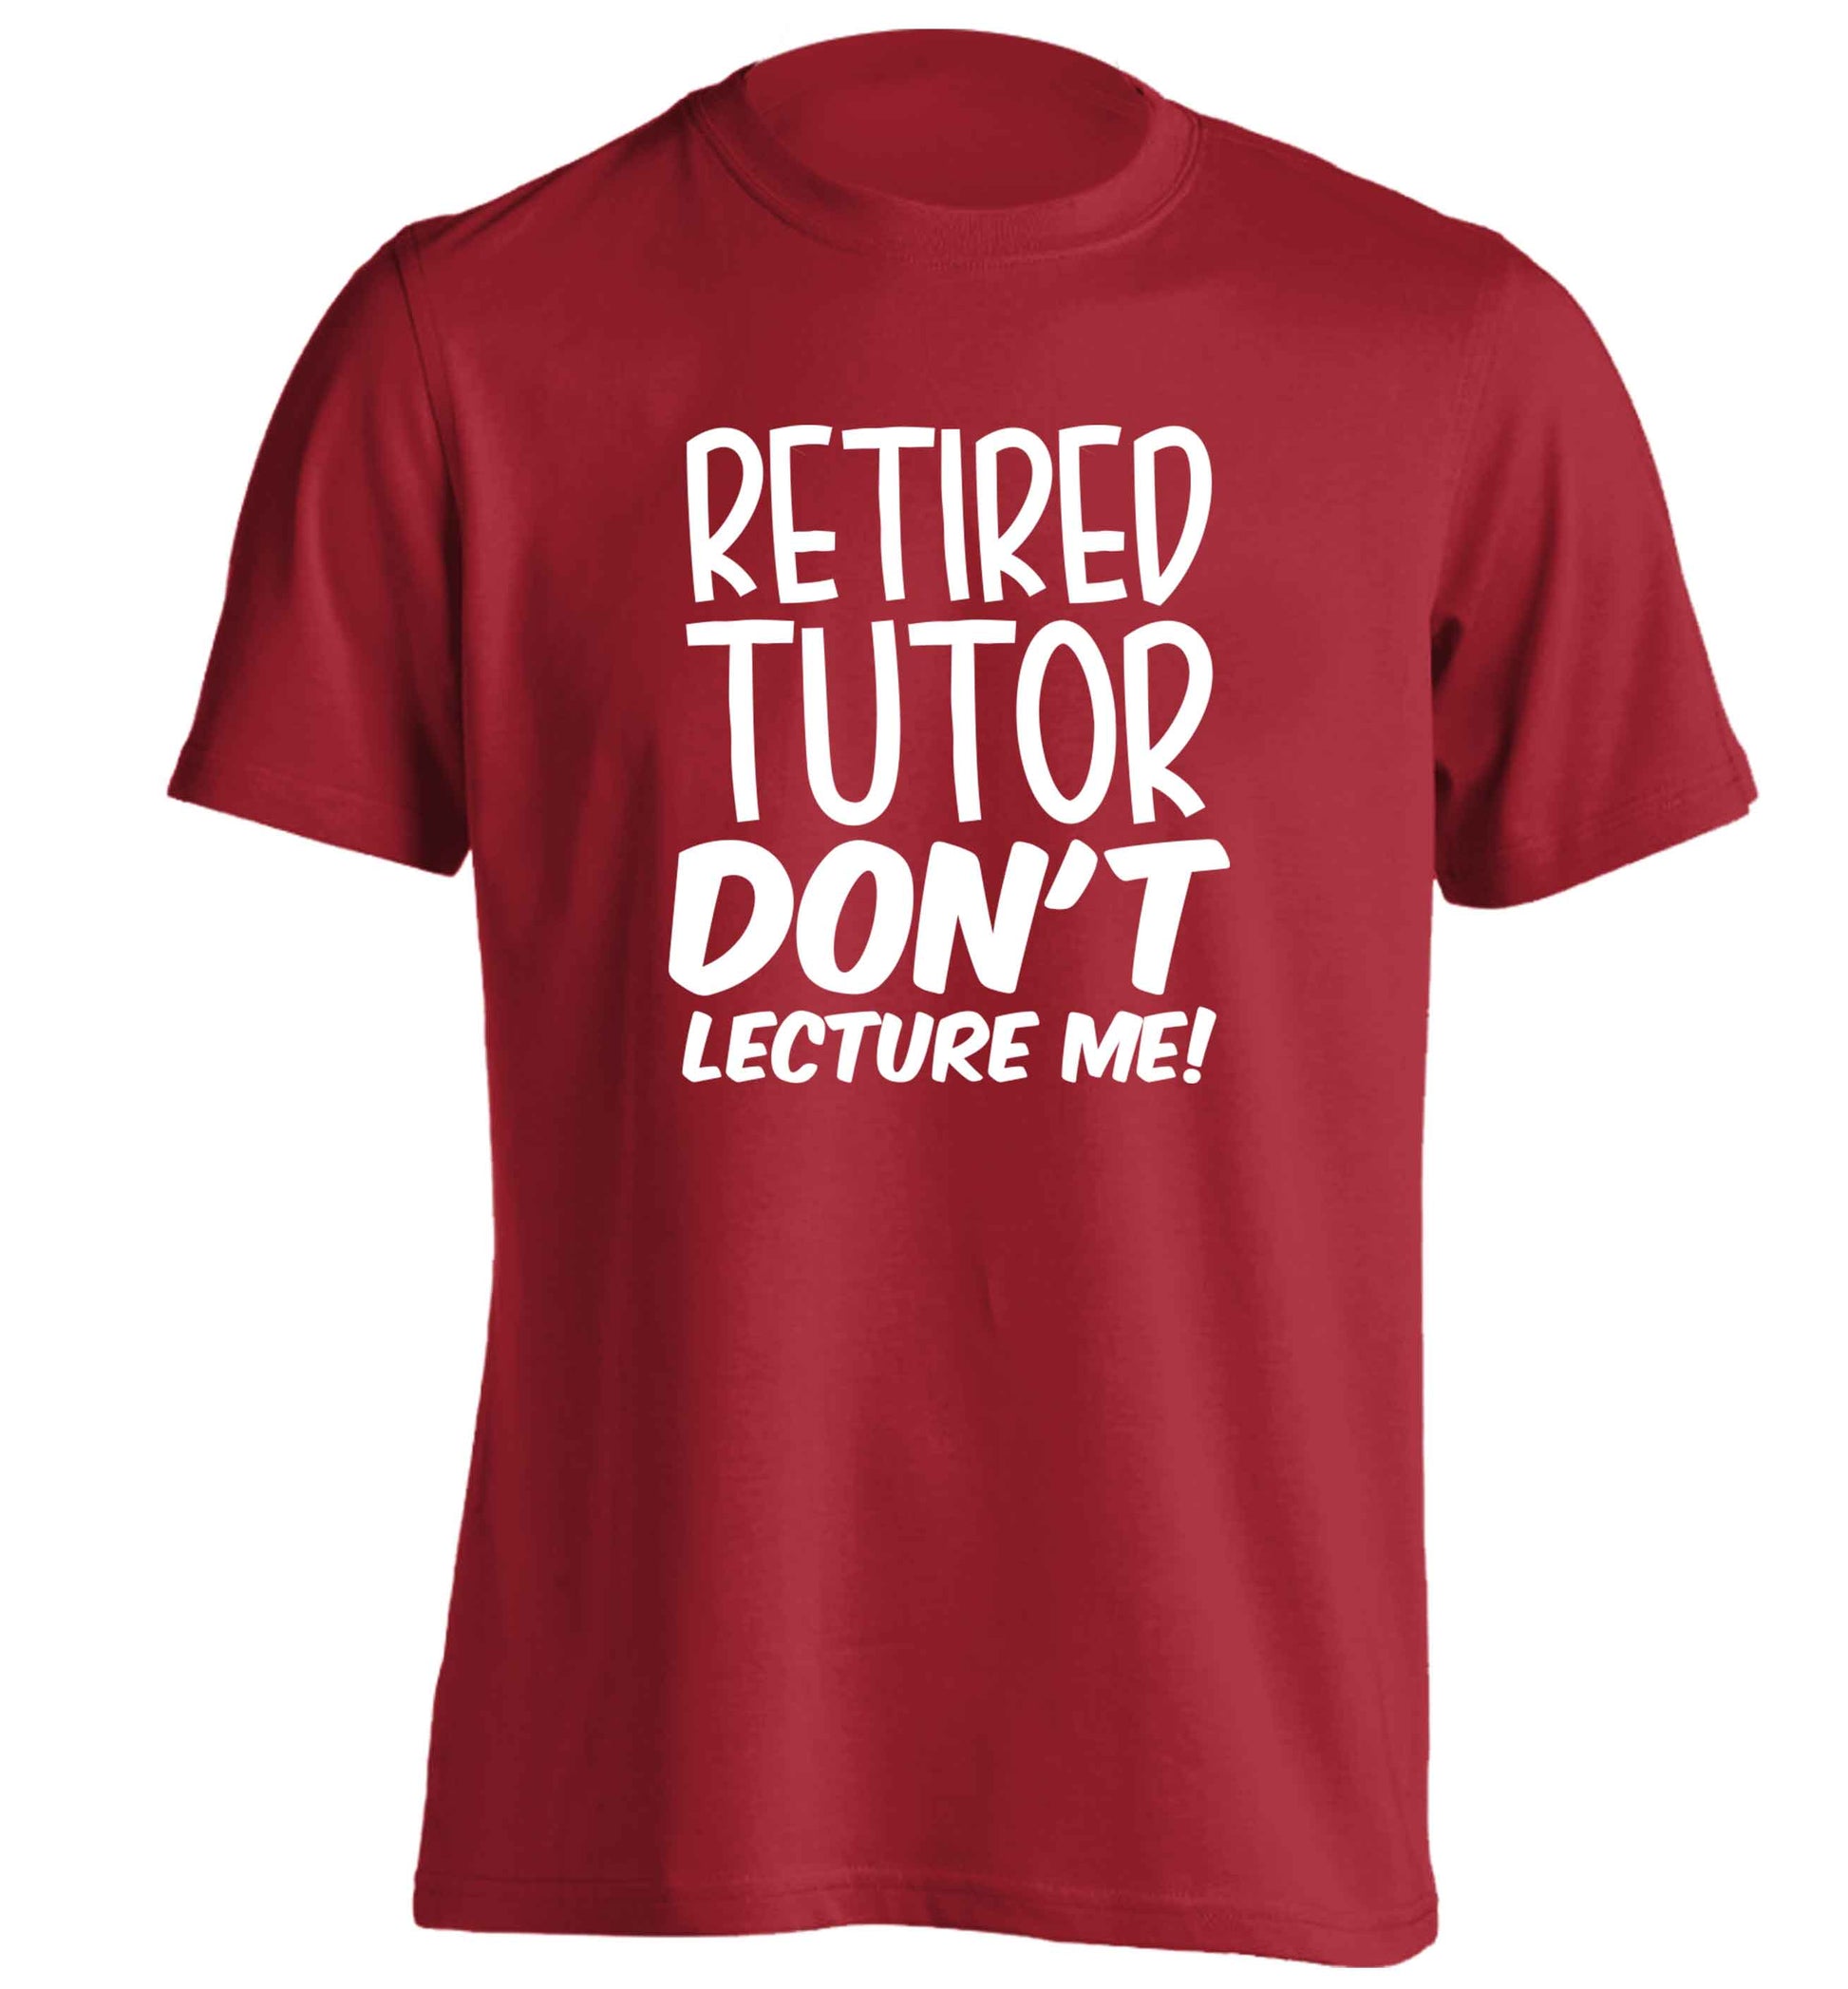 Retired tutor don't lecture me! adults unisex red Tshirt 2XL